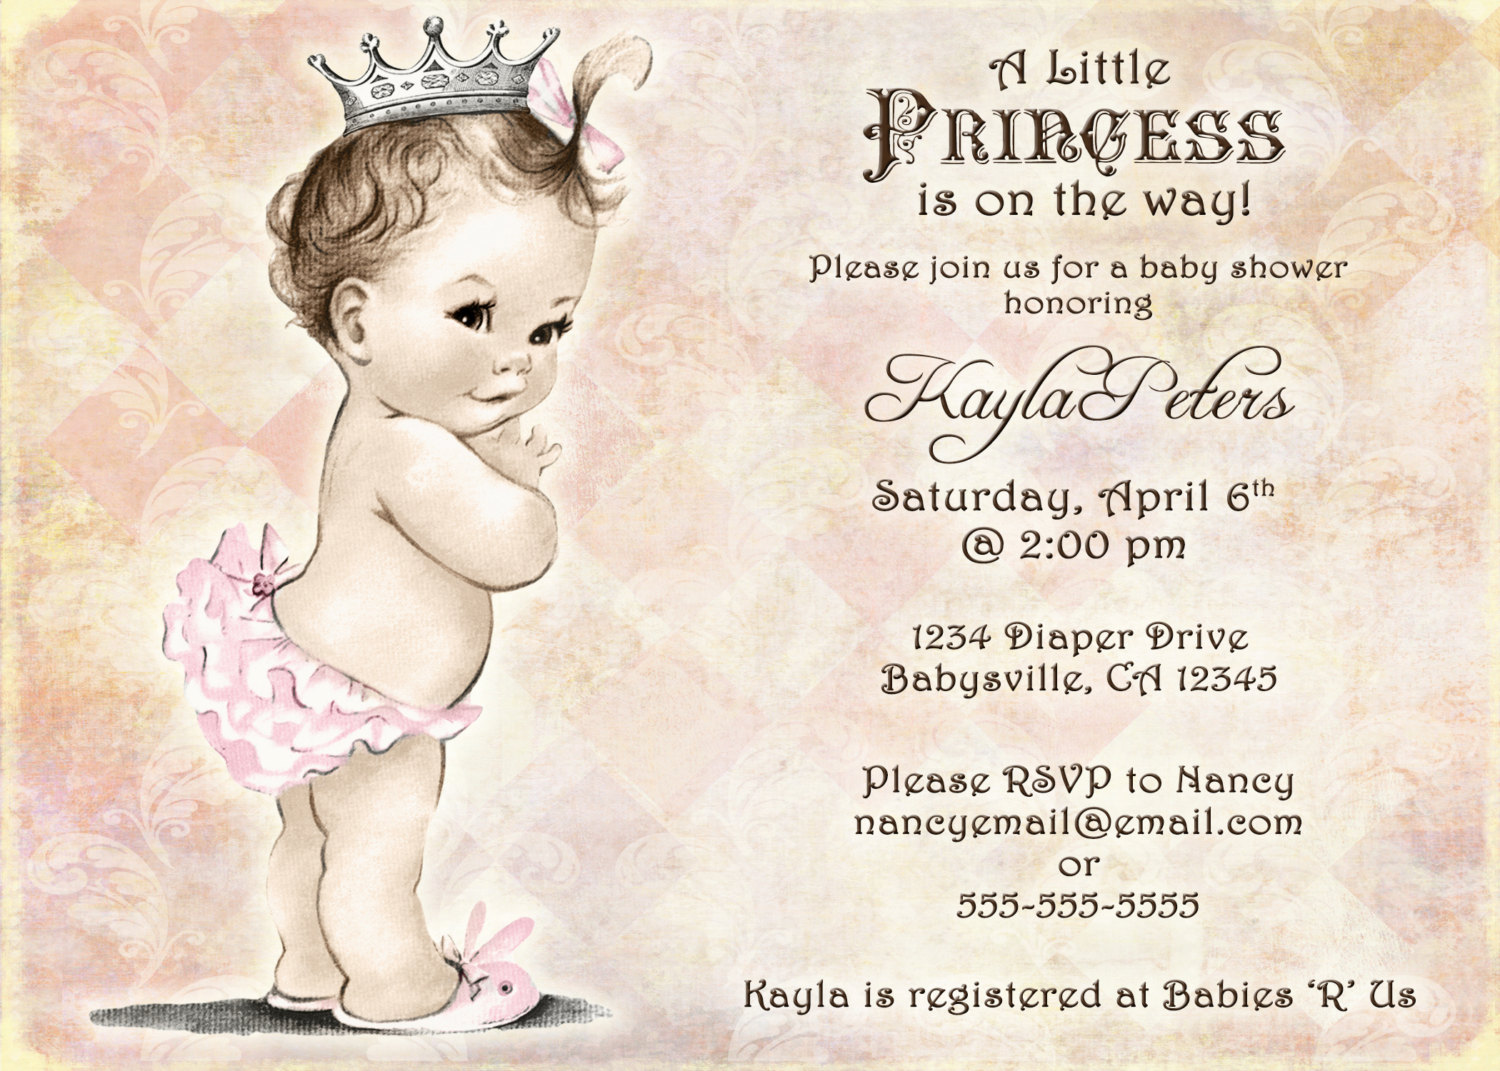 Full Size of Baby Shower:cheap Invitations Baby Shower Homemade Baby Shower Decorations Baby Shower Centerpiece Ideas For Boys Homemade Baby Shower Centerpieces Baby Boy Shower Ideas Themes For Baby Girl Nursery Baby Shower Themes Baby Shower Themes For Girls